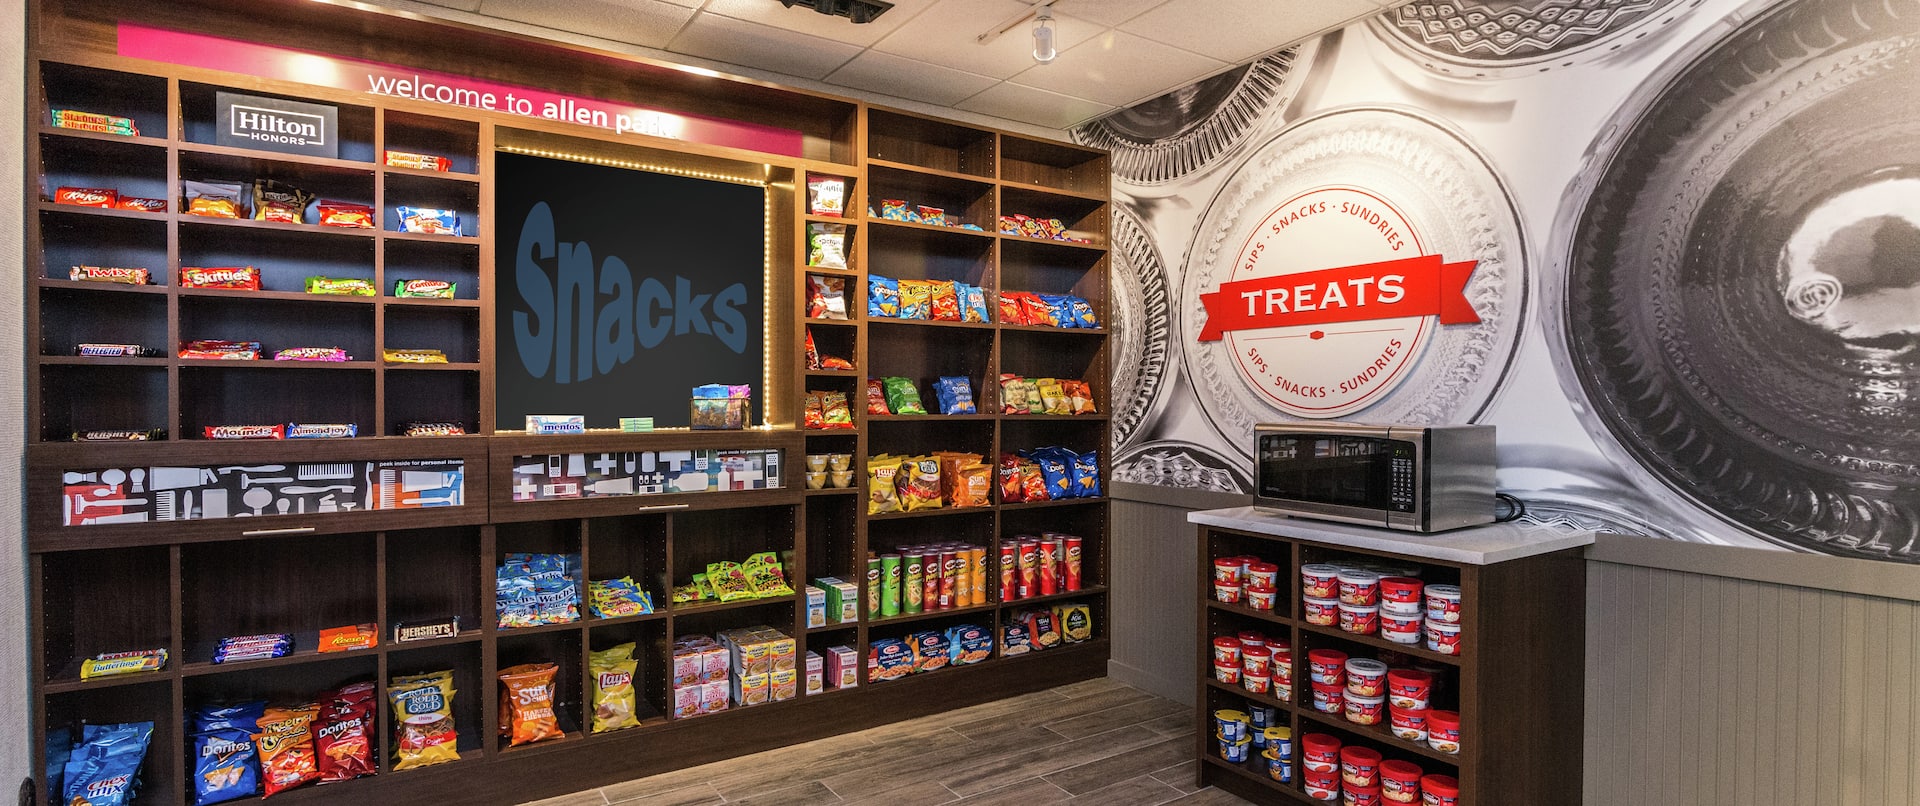 The Treat Shoppe with Chips and Candy